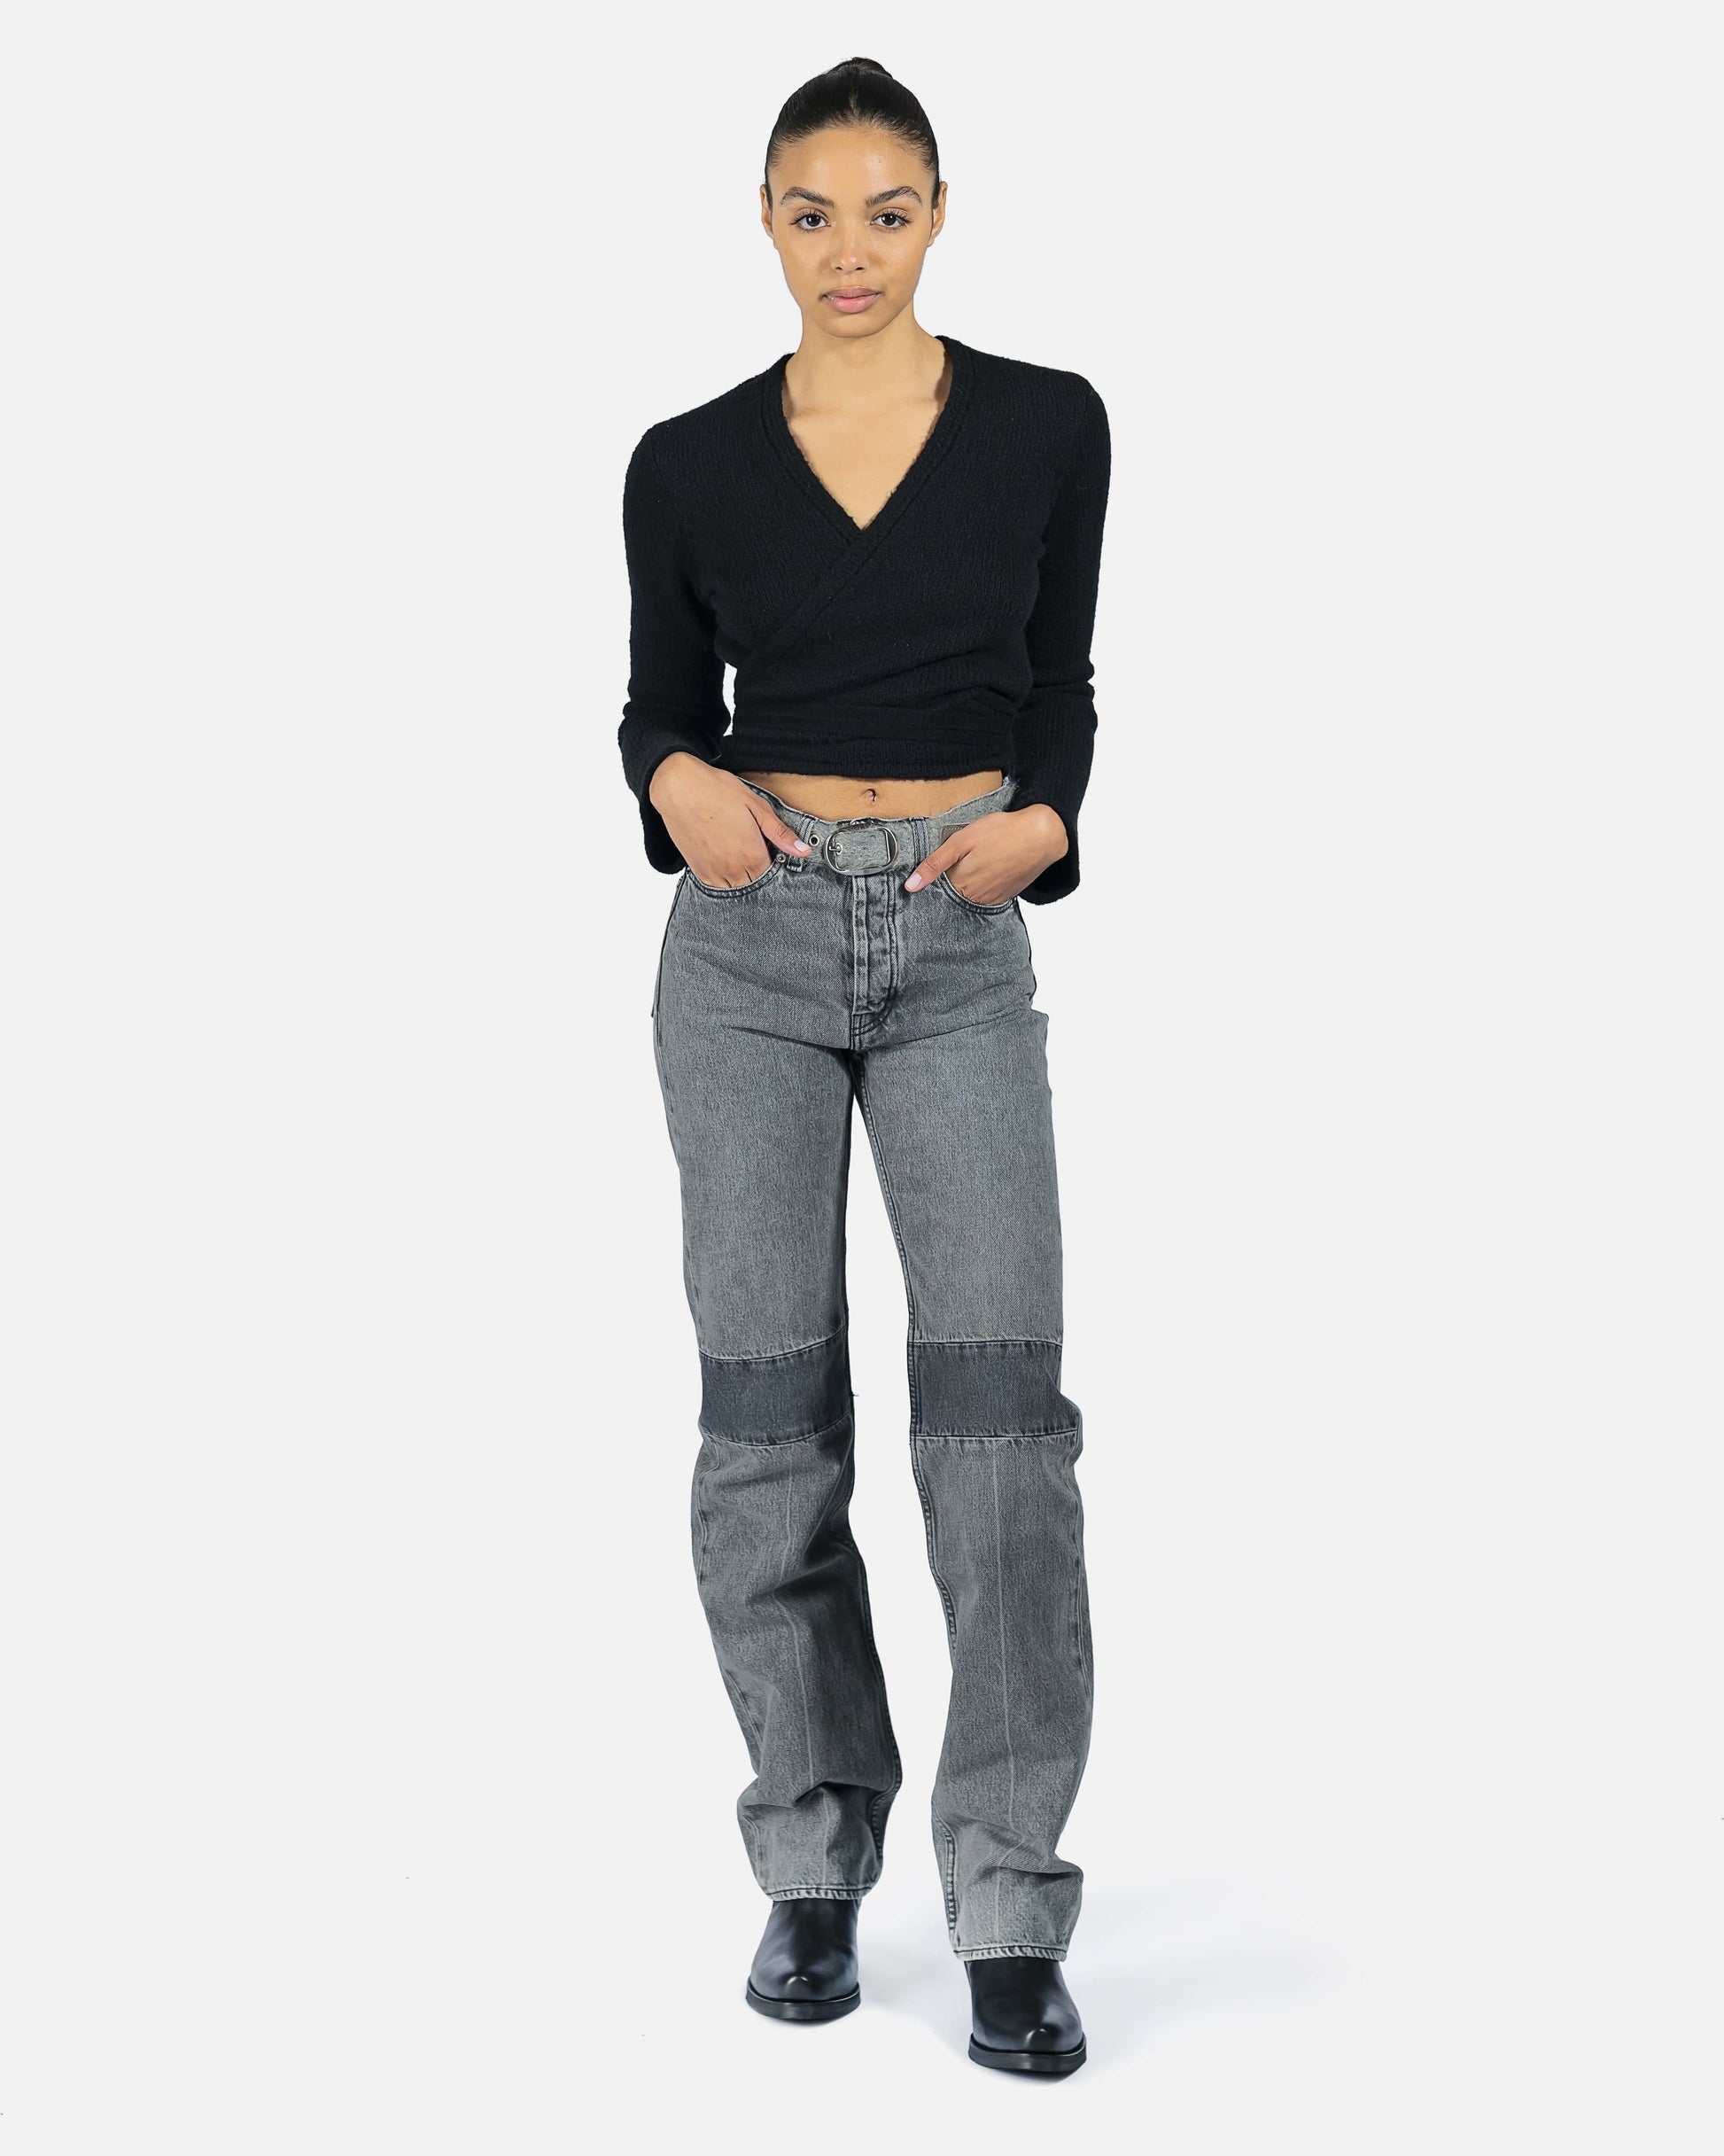 Our Legacy Women Pants Extended Linear Cut in Black/Grey